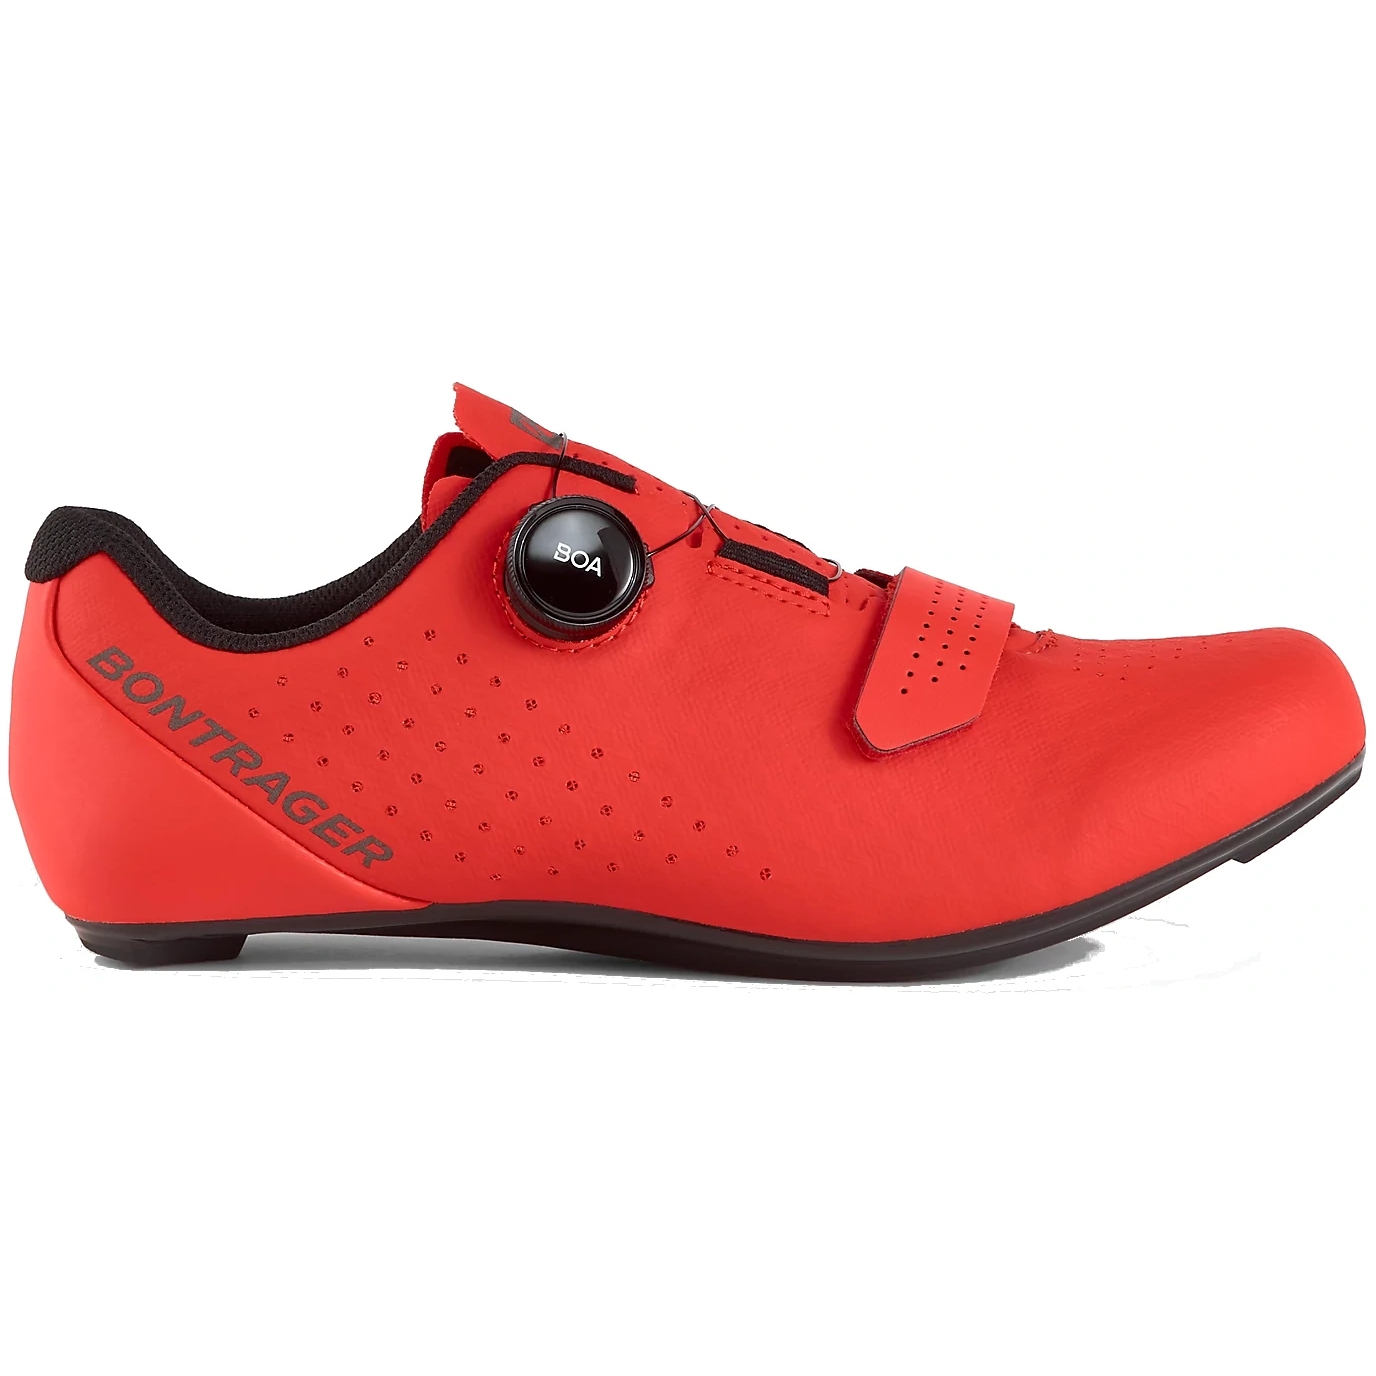 Picture of Bontrager Circuit Road Bike Shoe - red